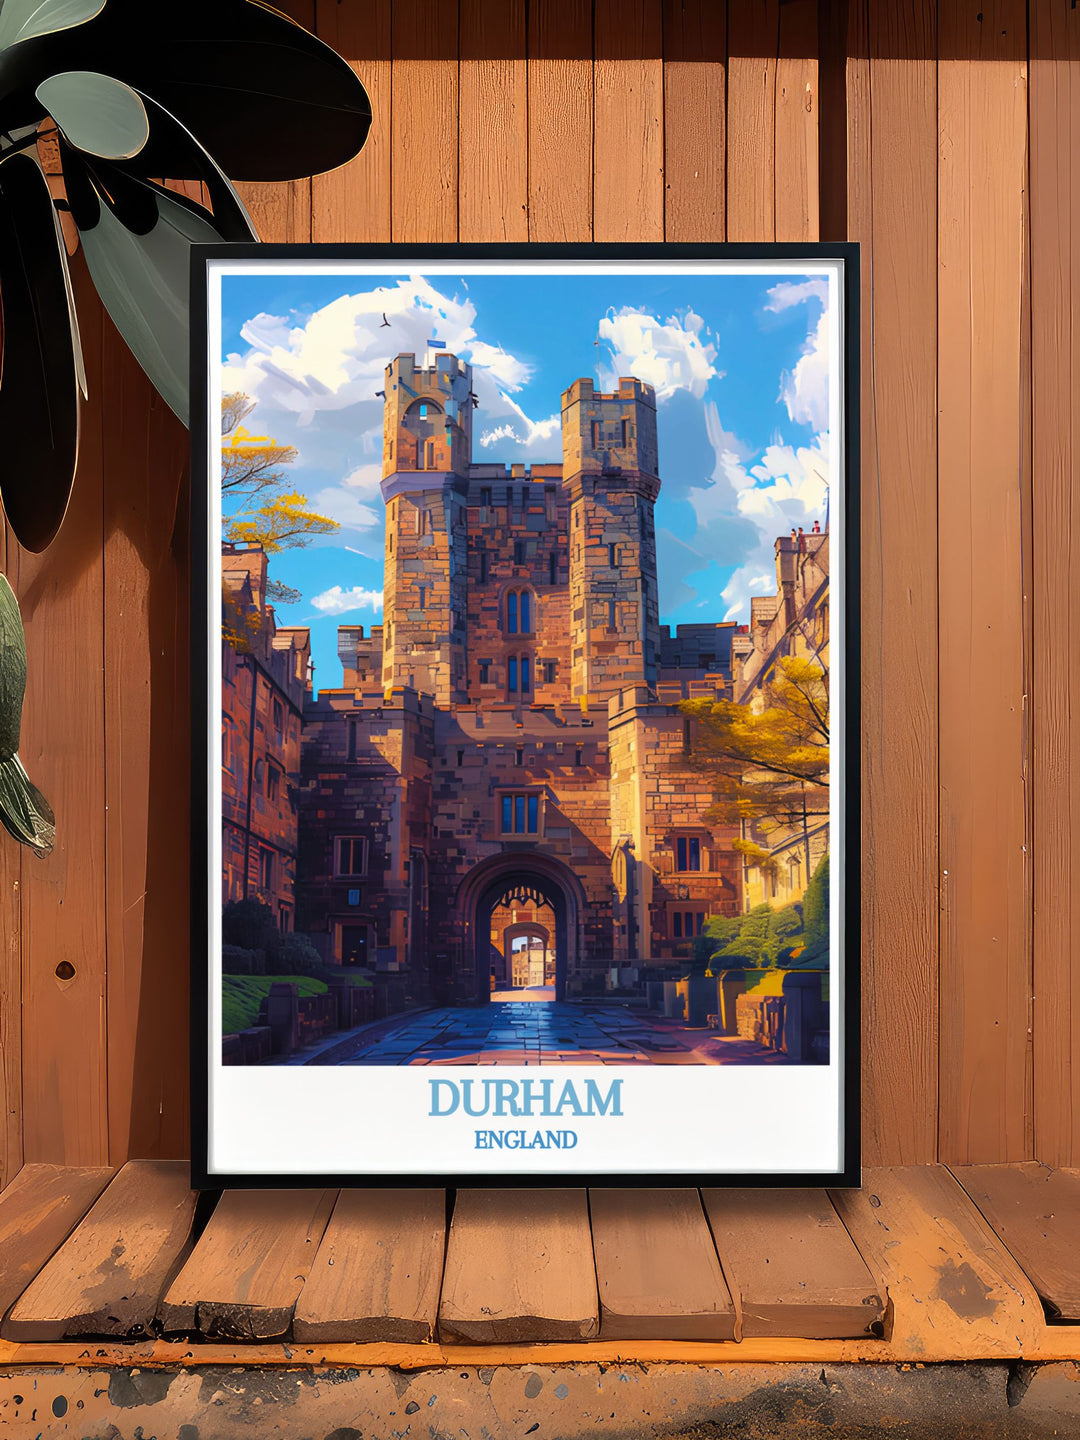 The serene beauty of Durham and its iconic castle are beautifully illustrated in this travel poster, capturing the essence of a timeless English city.